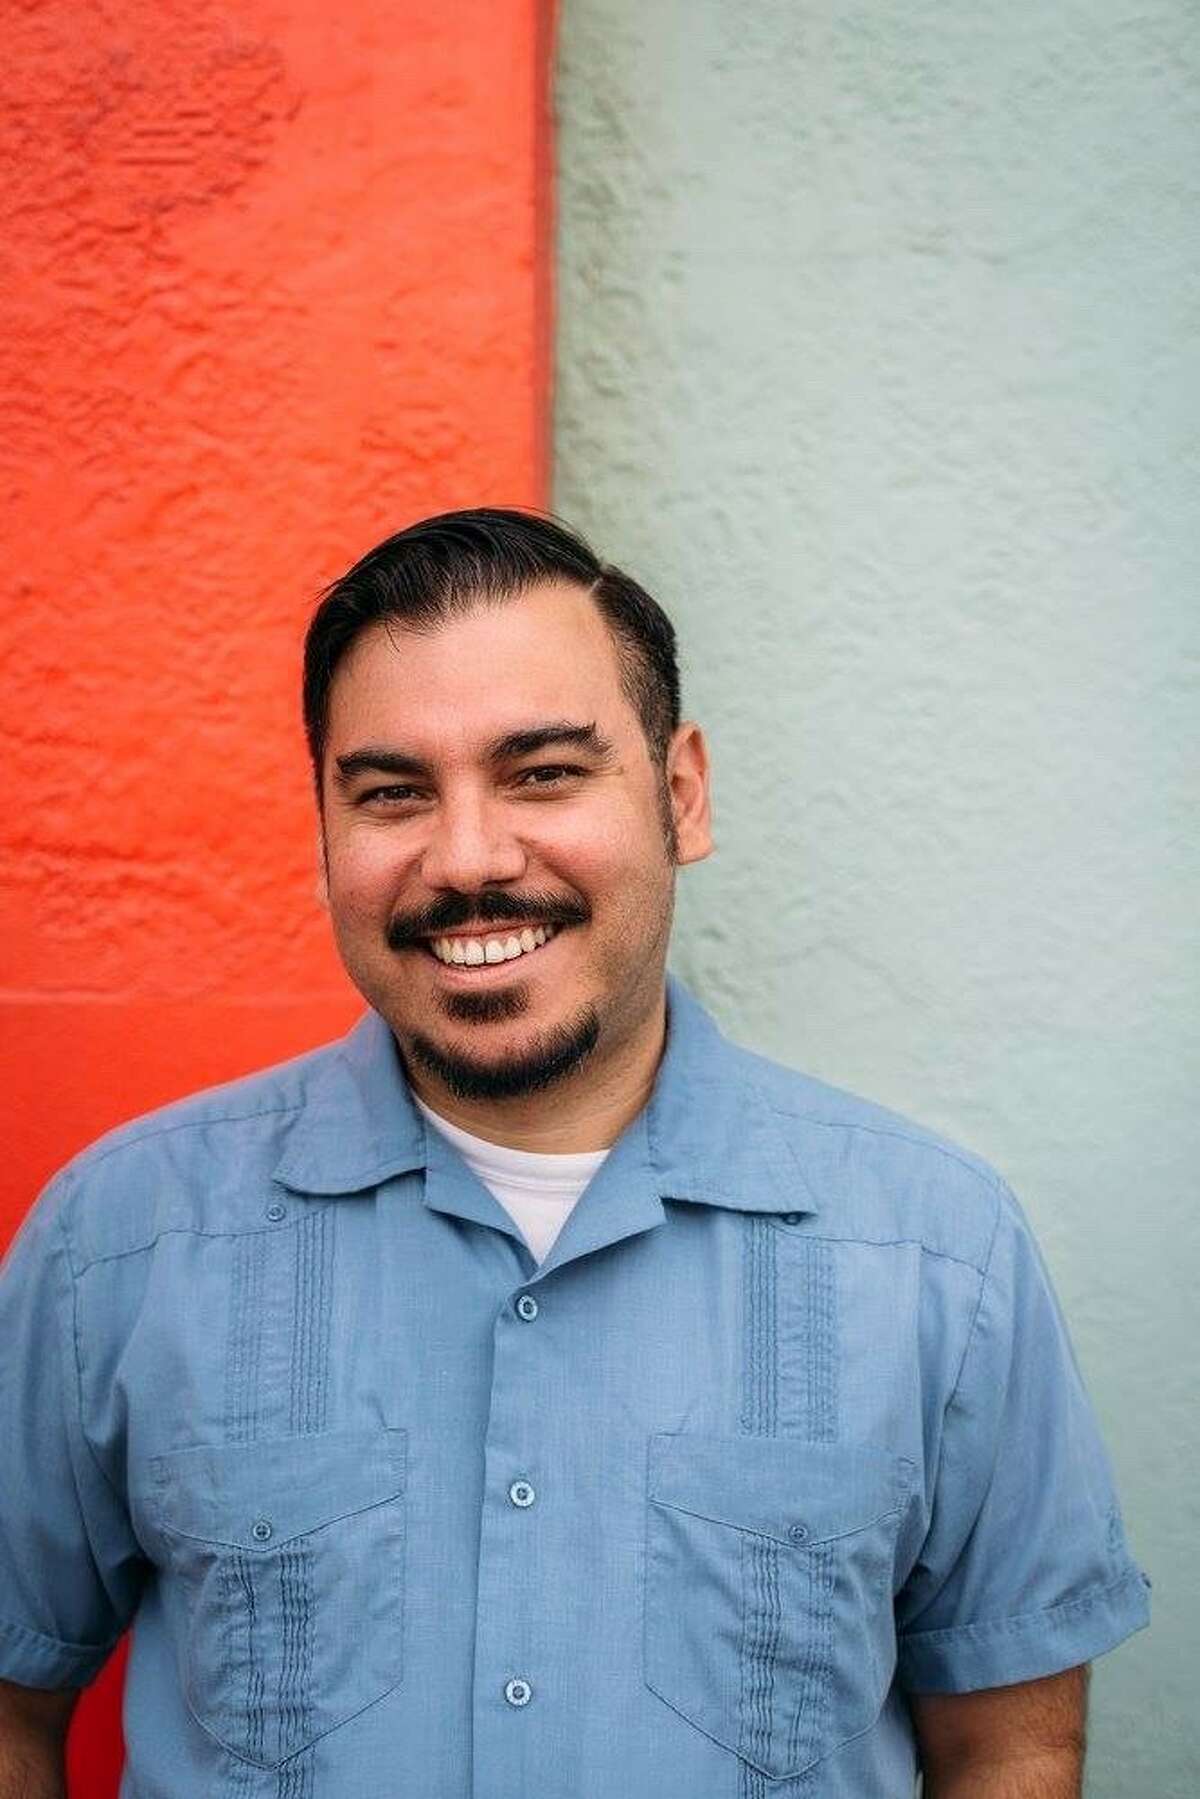 Texas Monthly has hired Dallas taco authority Jose R. Ralat as the magazine's first full-time taco edtior.